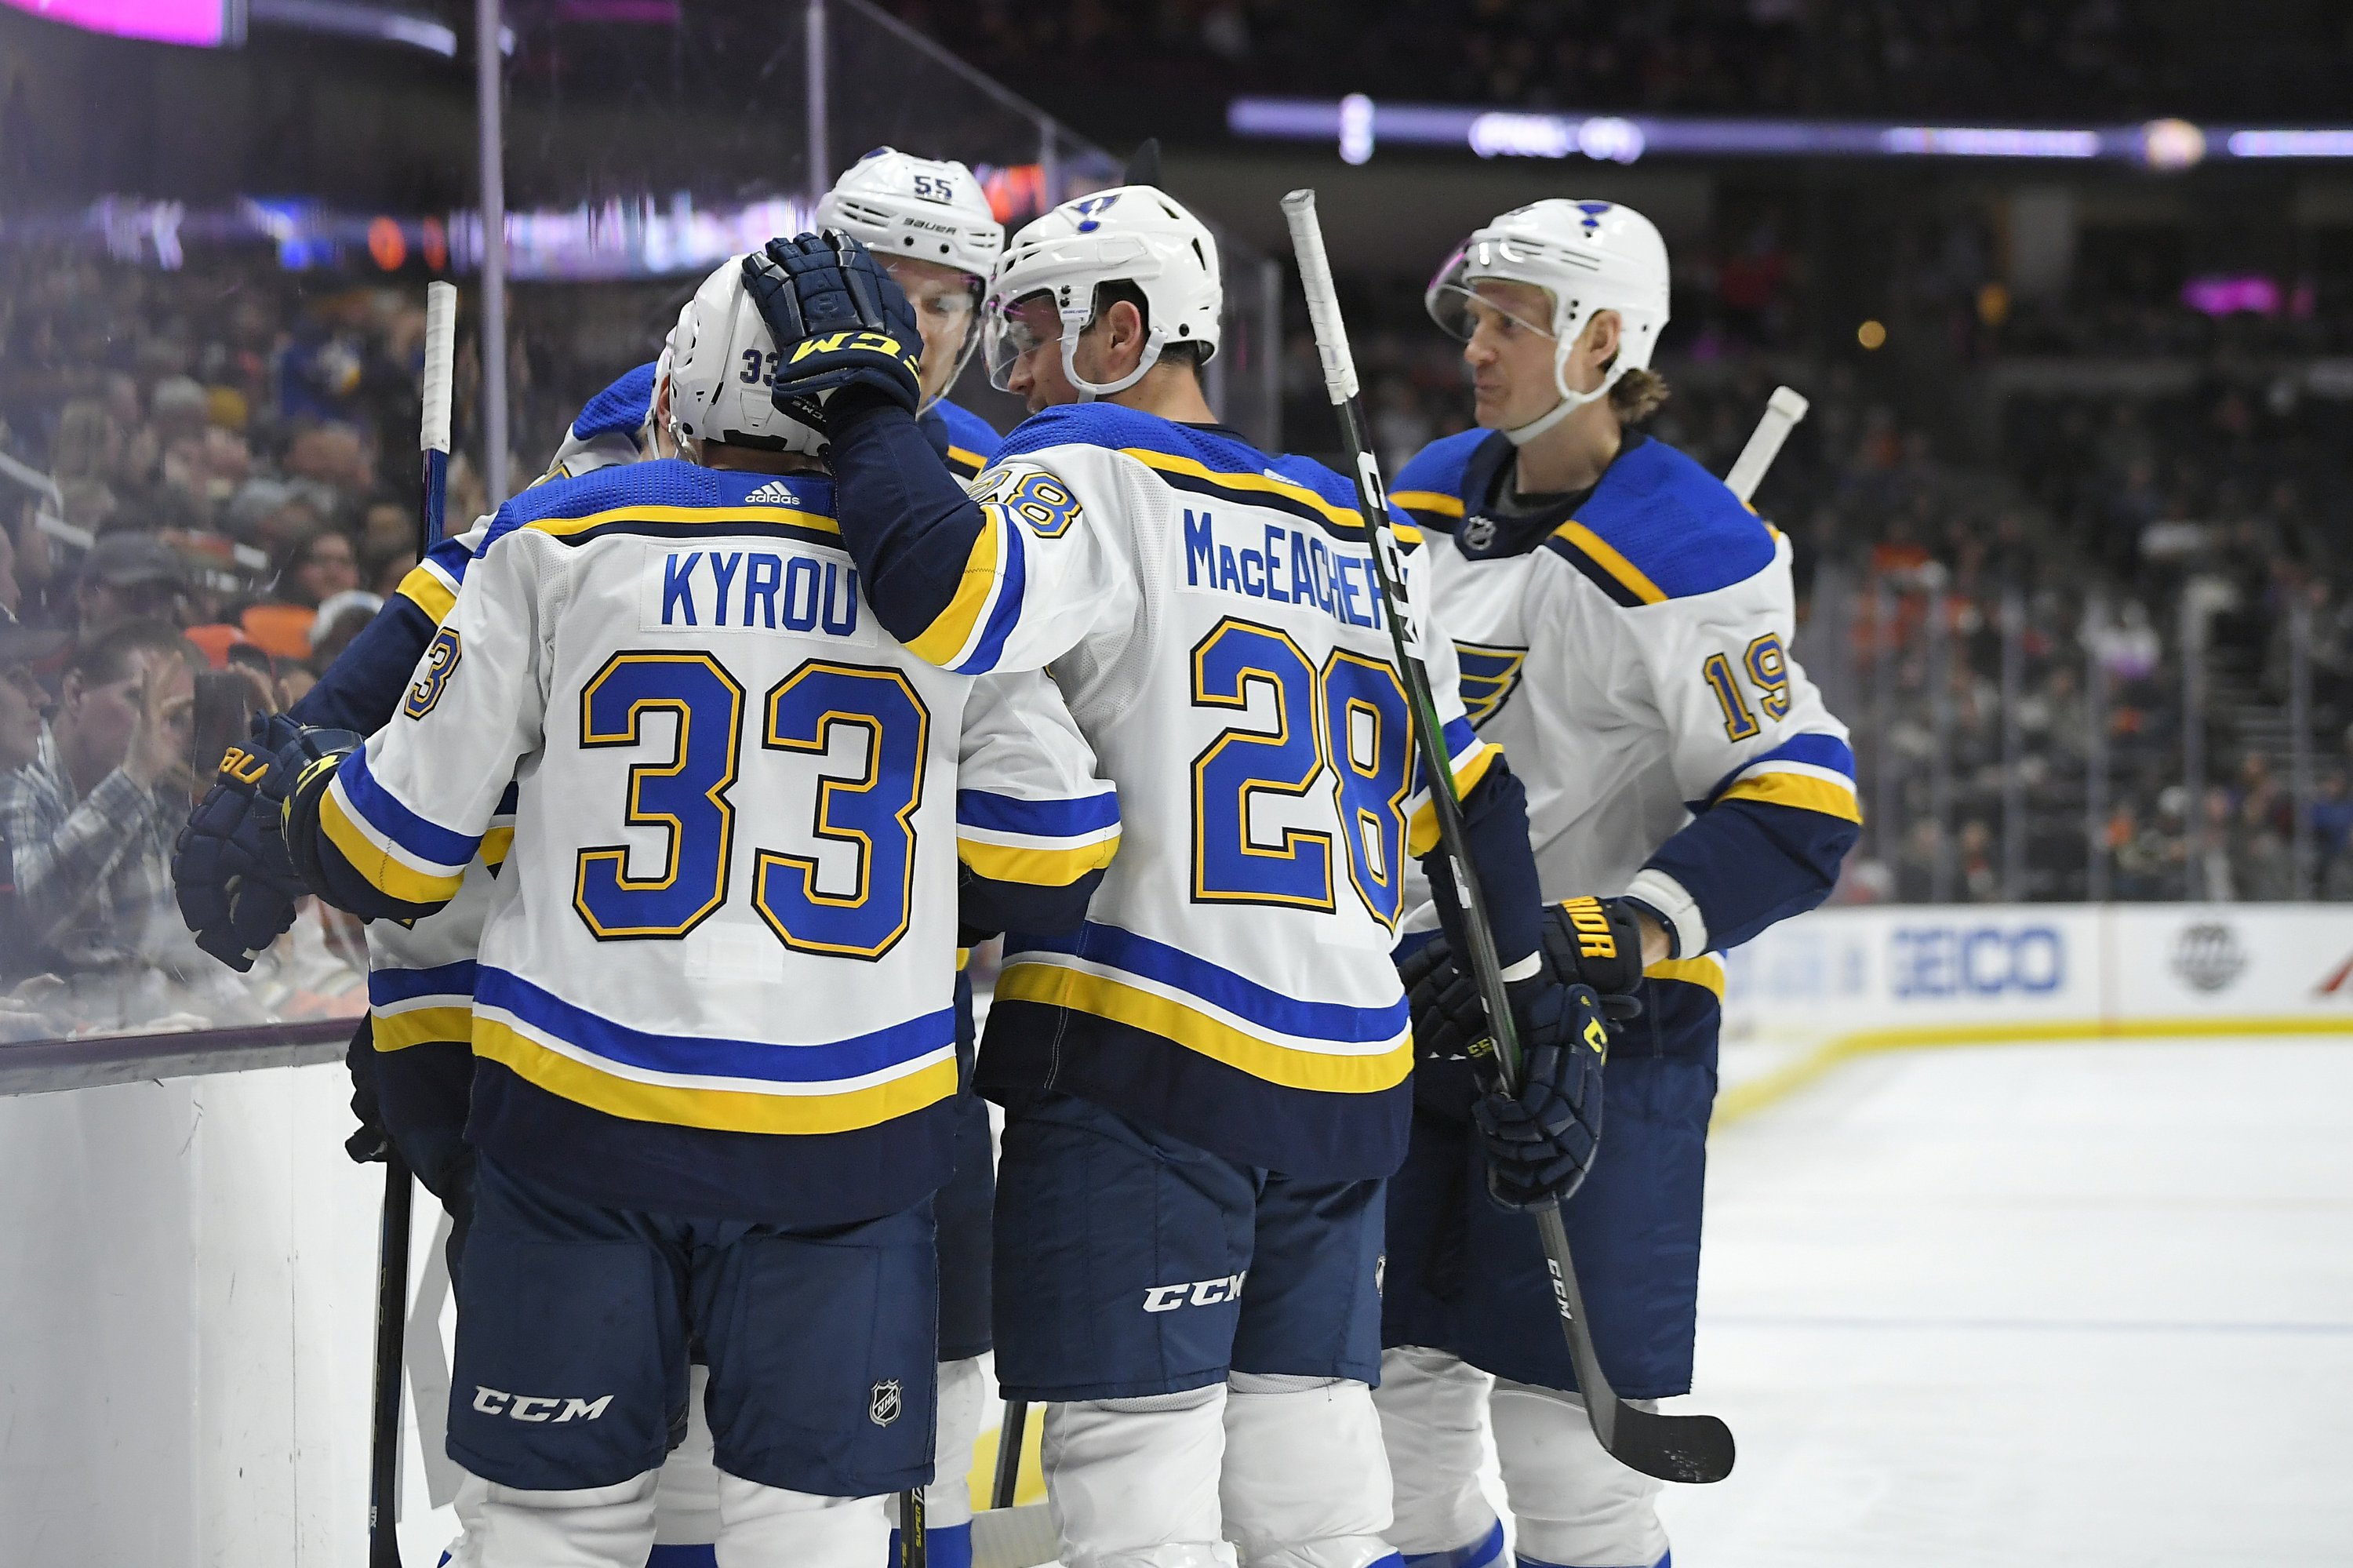 St. Louis Blues hockey player collapses during game - Good Morning America